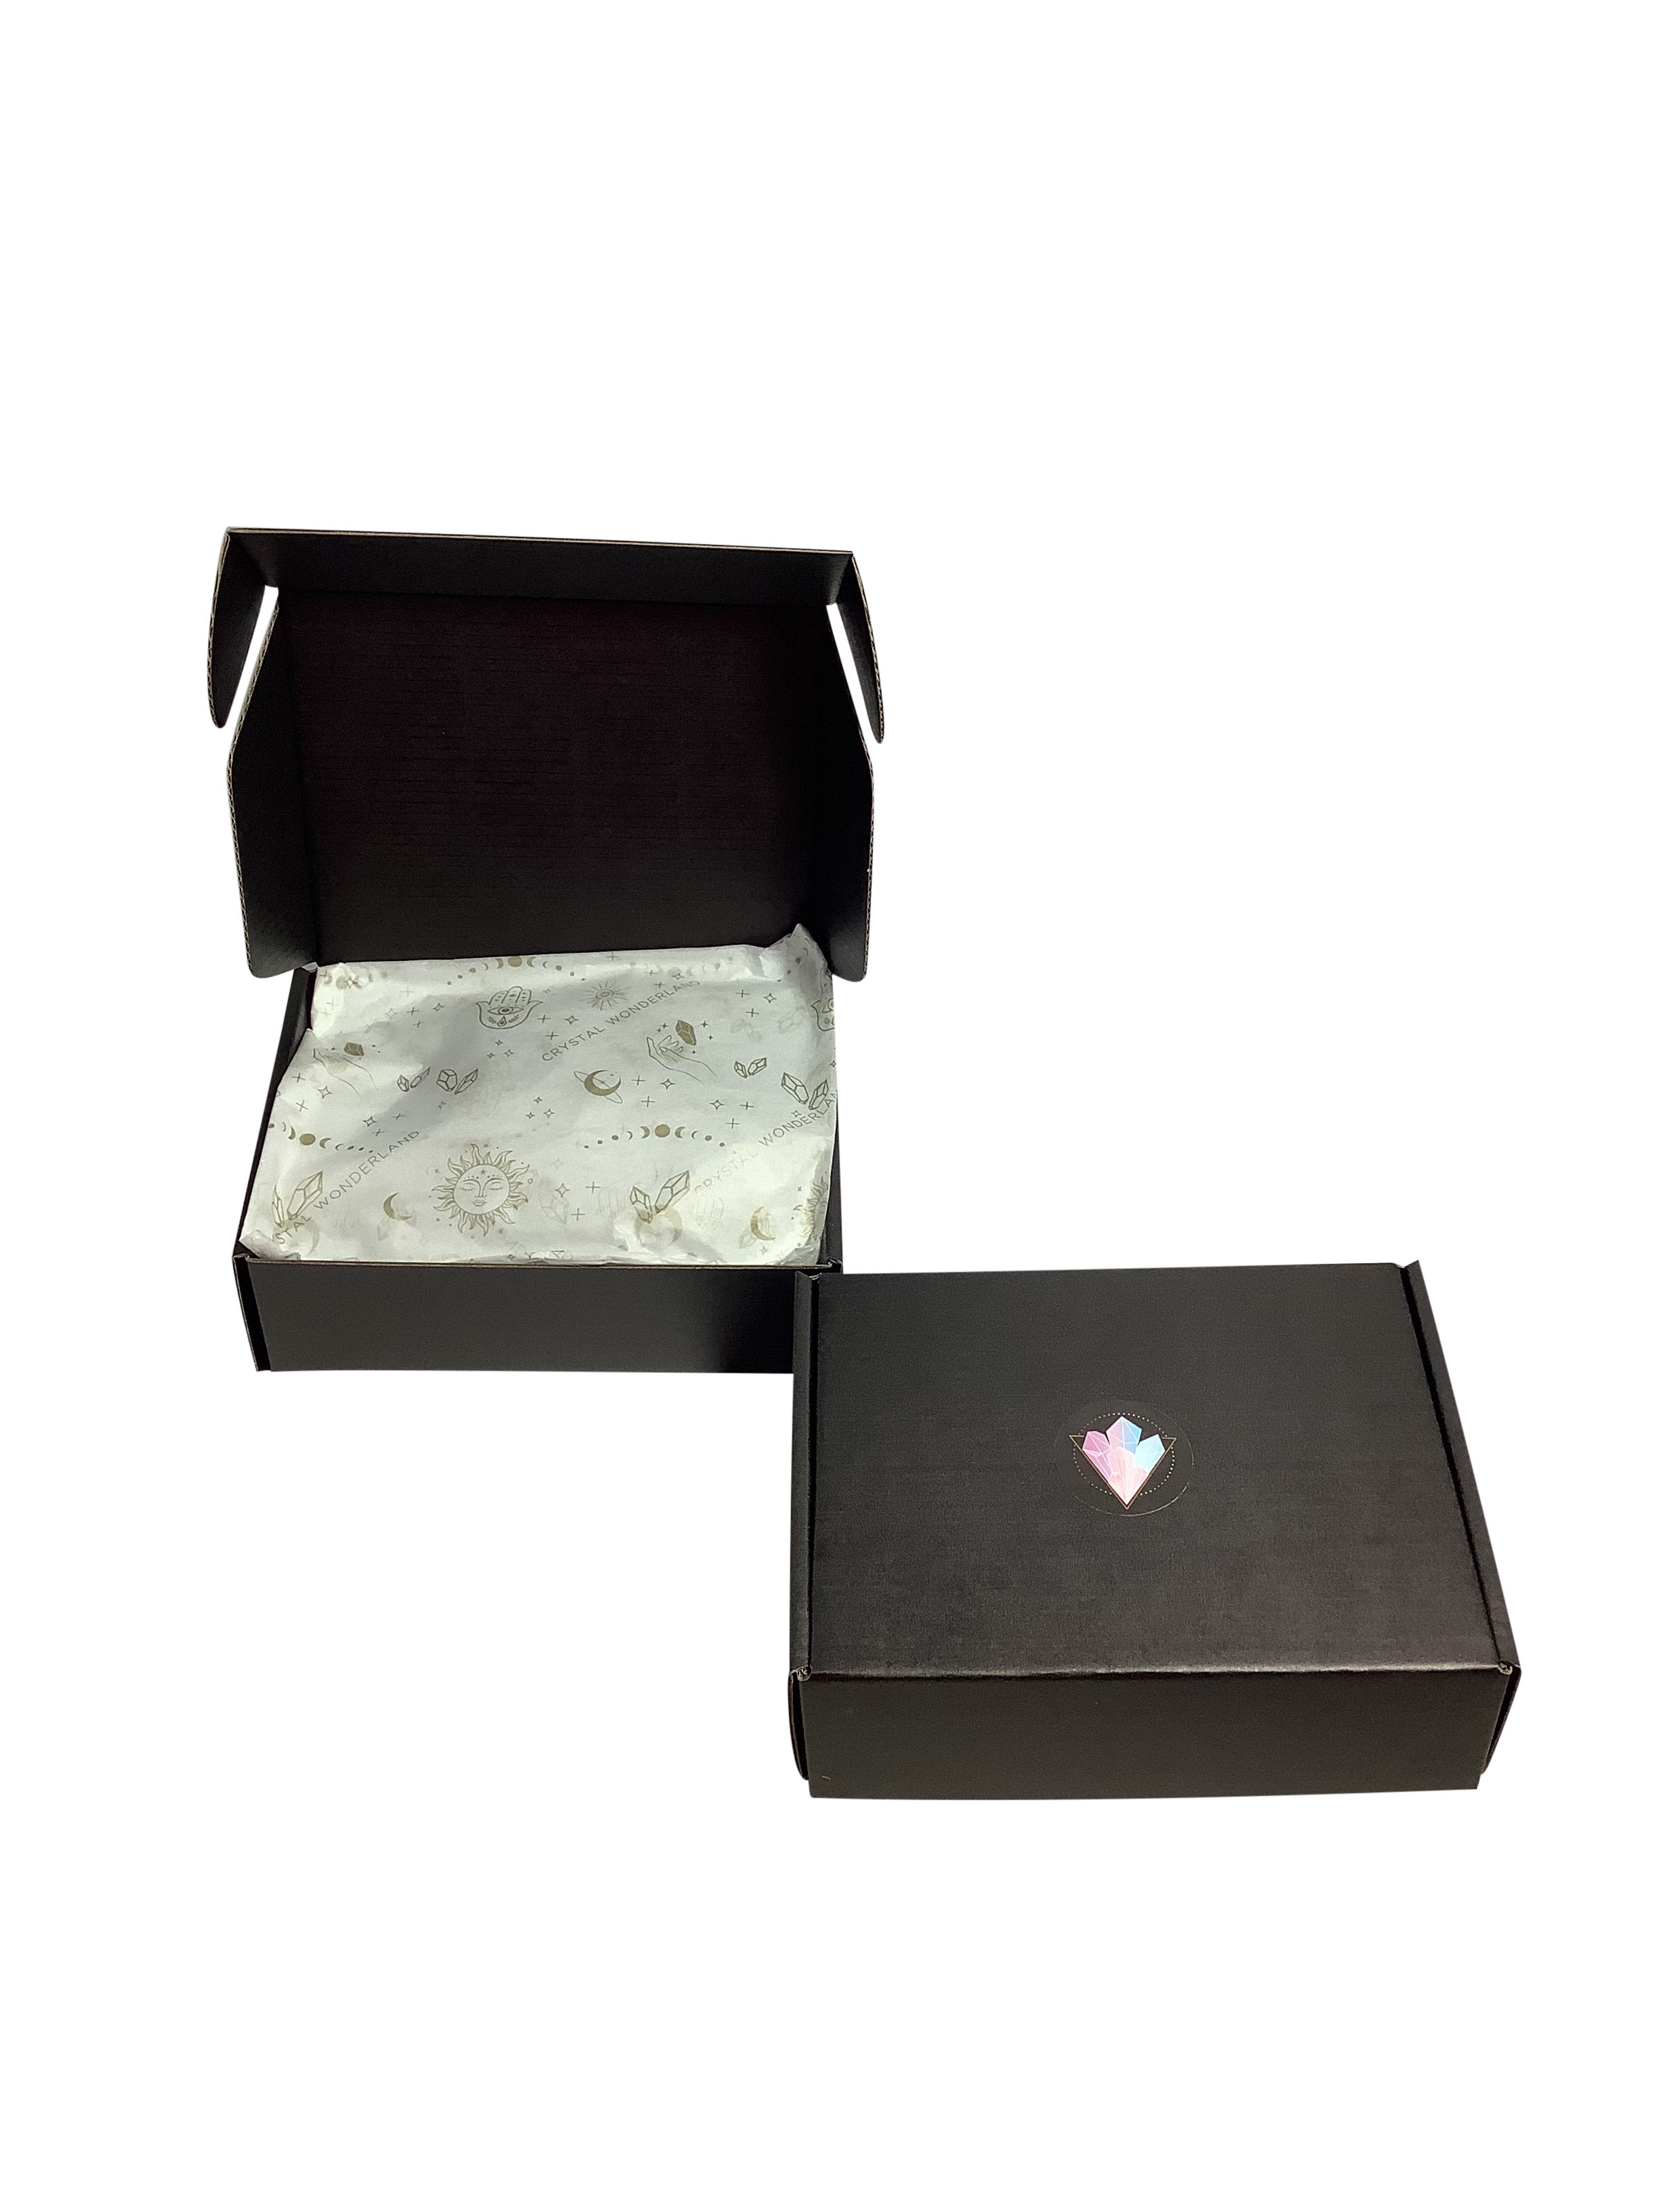 Blood Stone Crystal Coaster Heart Shaped 2 Pieces Gold